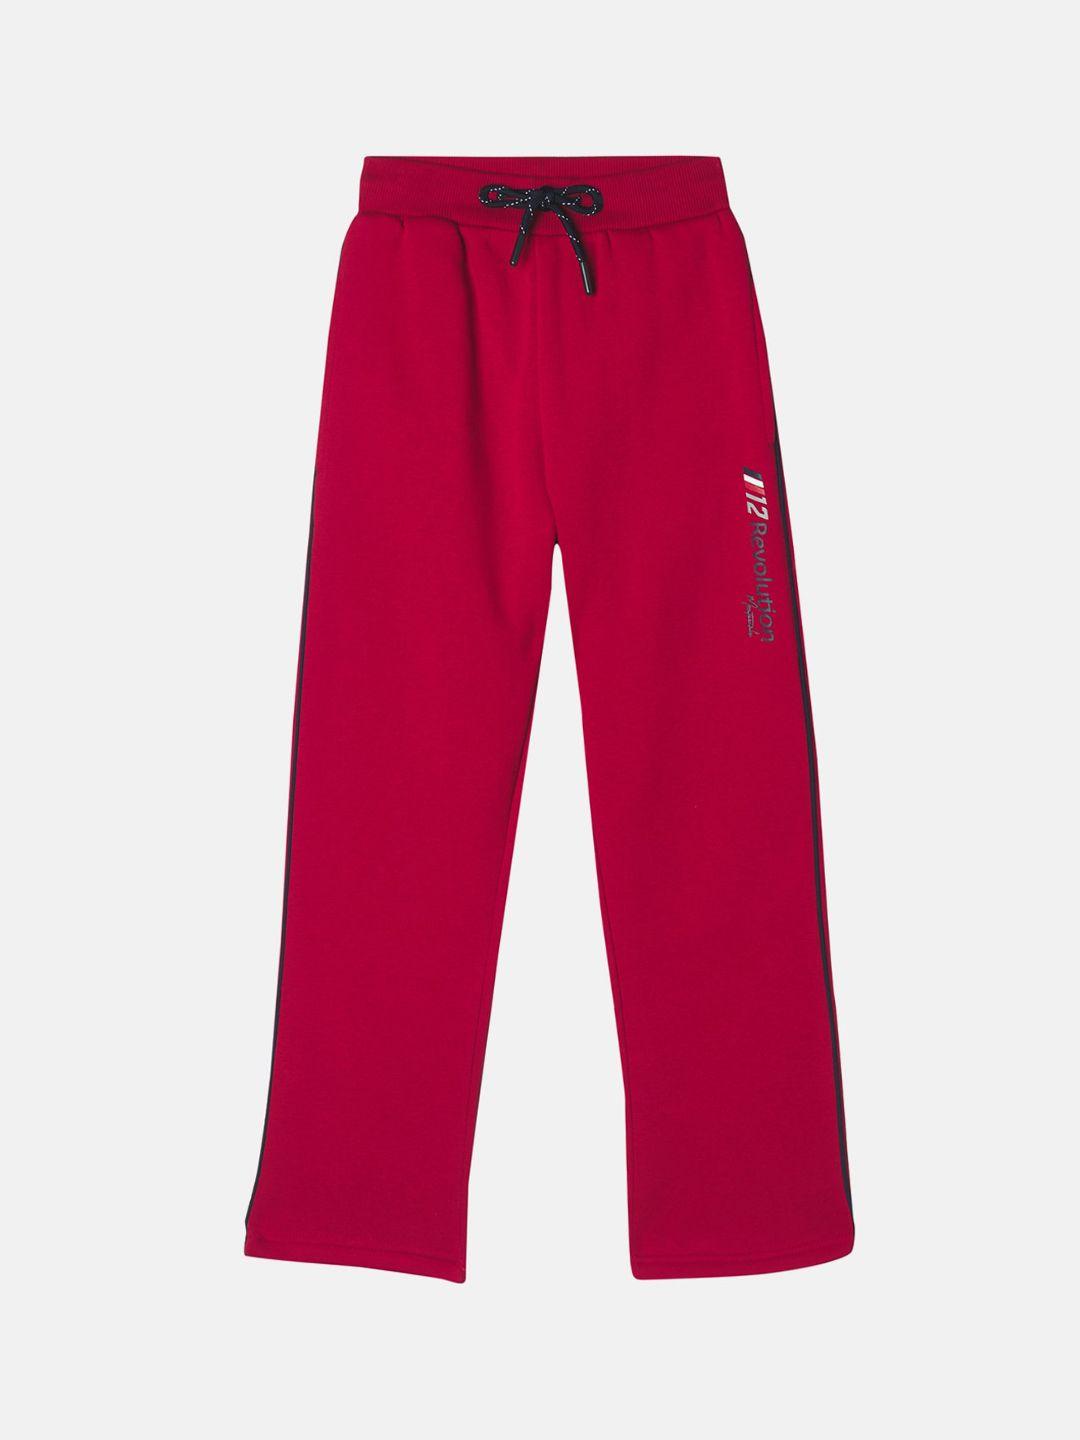 monte carlo boys red solid track pant